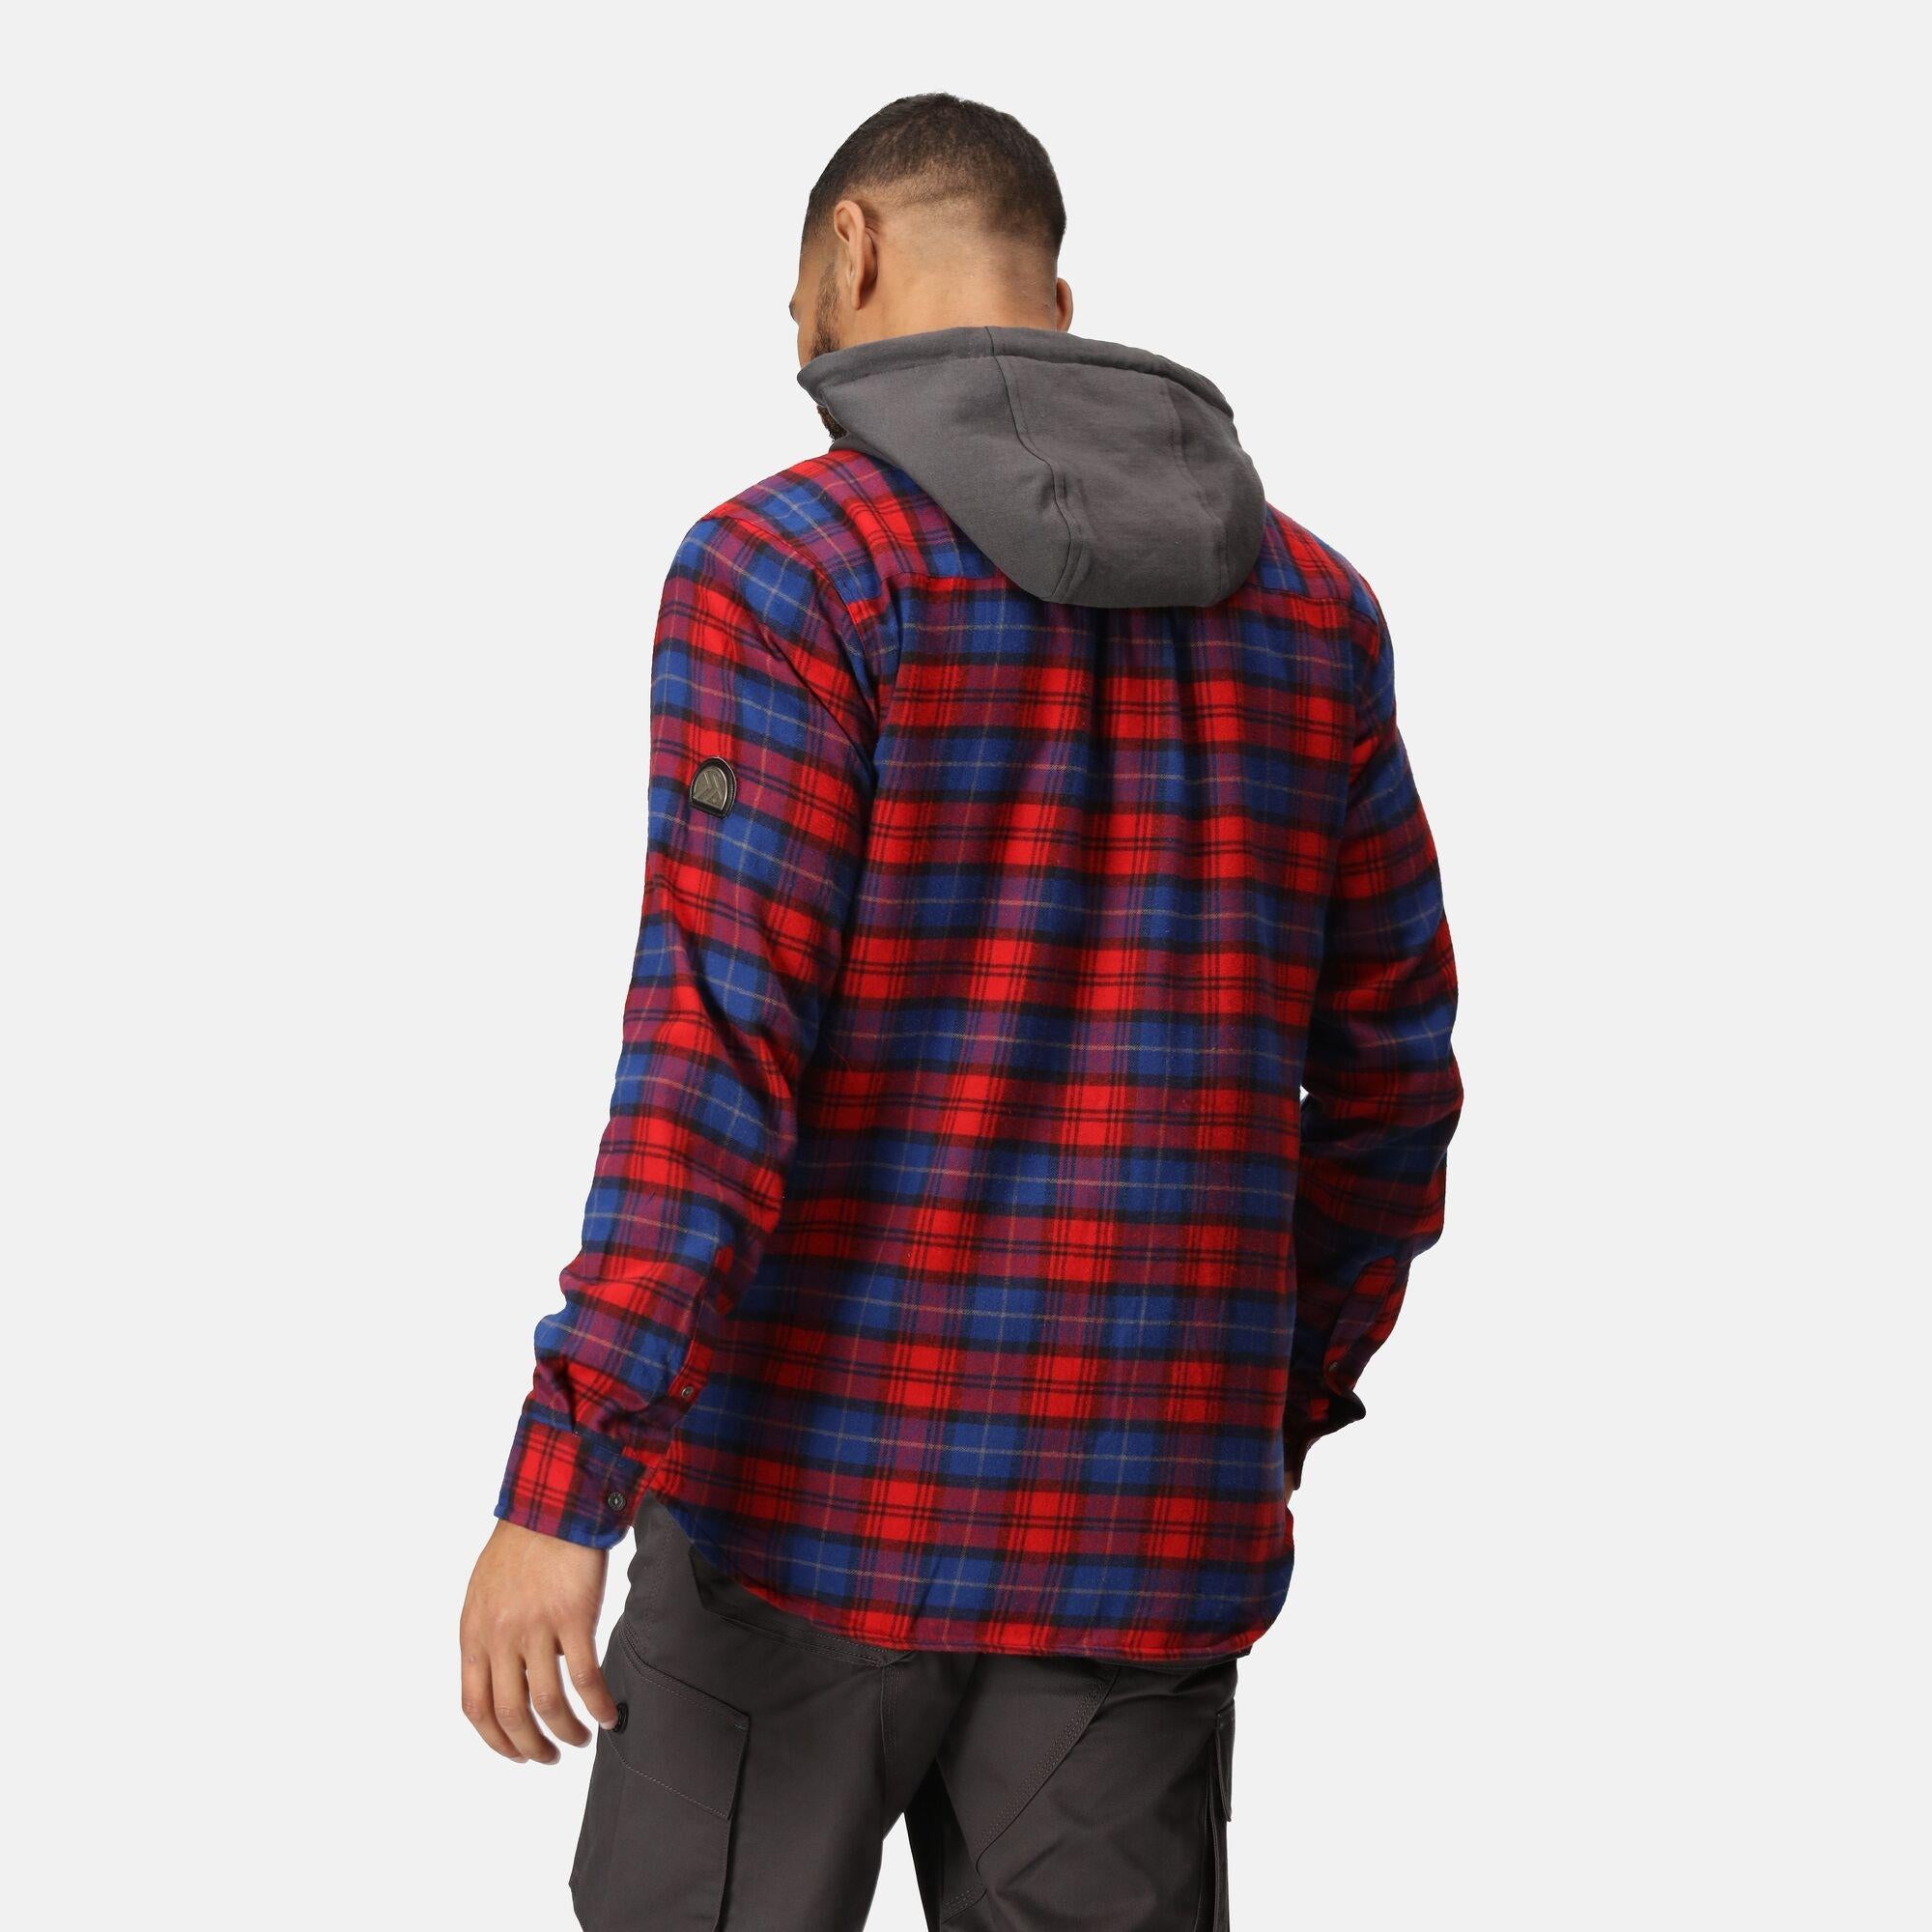 Regatta Siege red check cotton padded hooded work shirt #TRS205